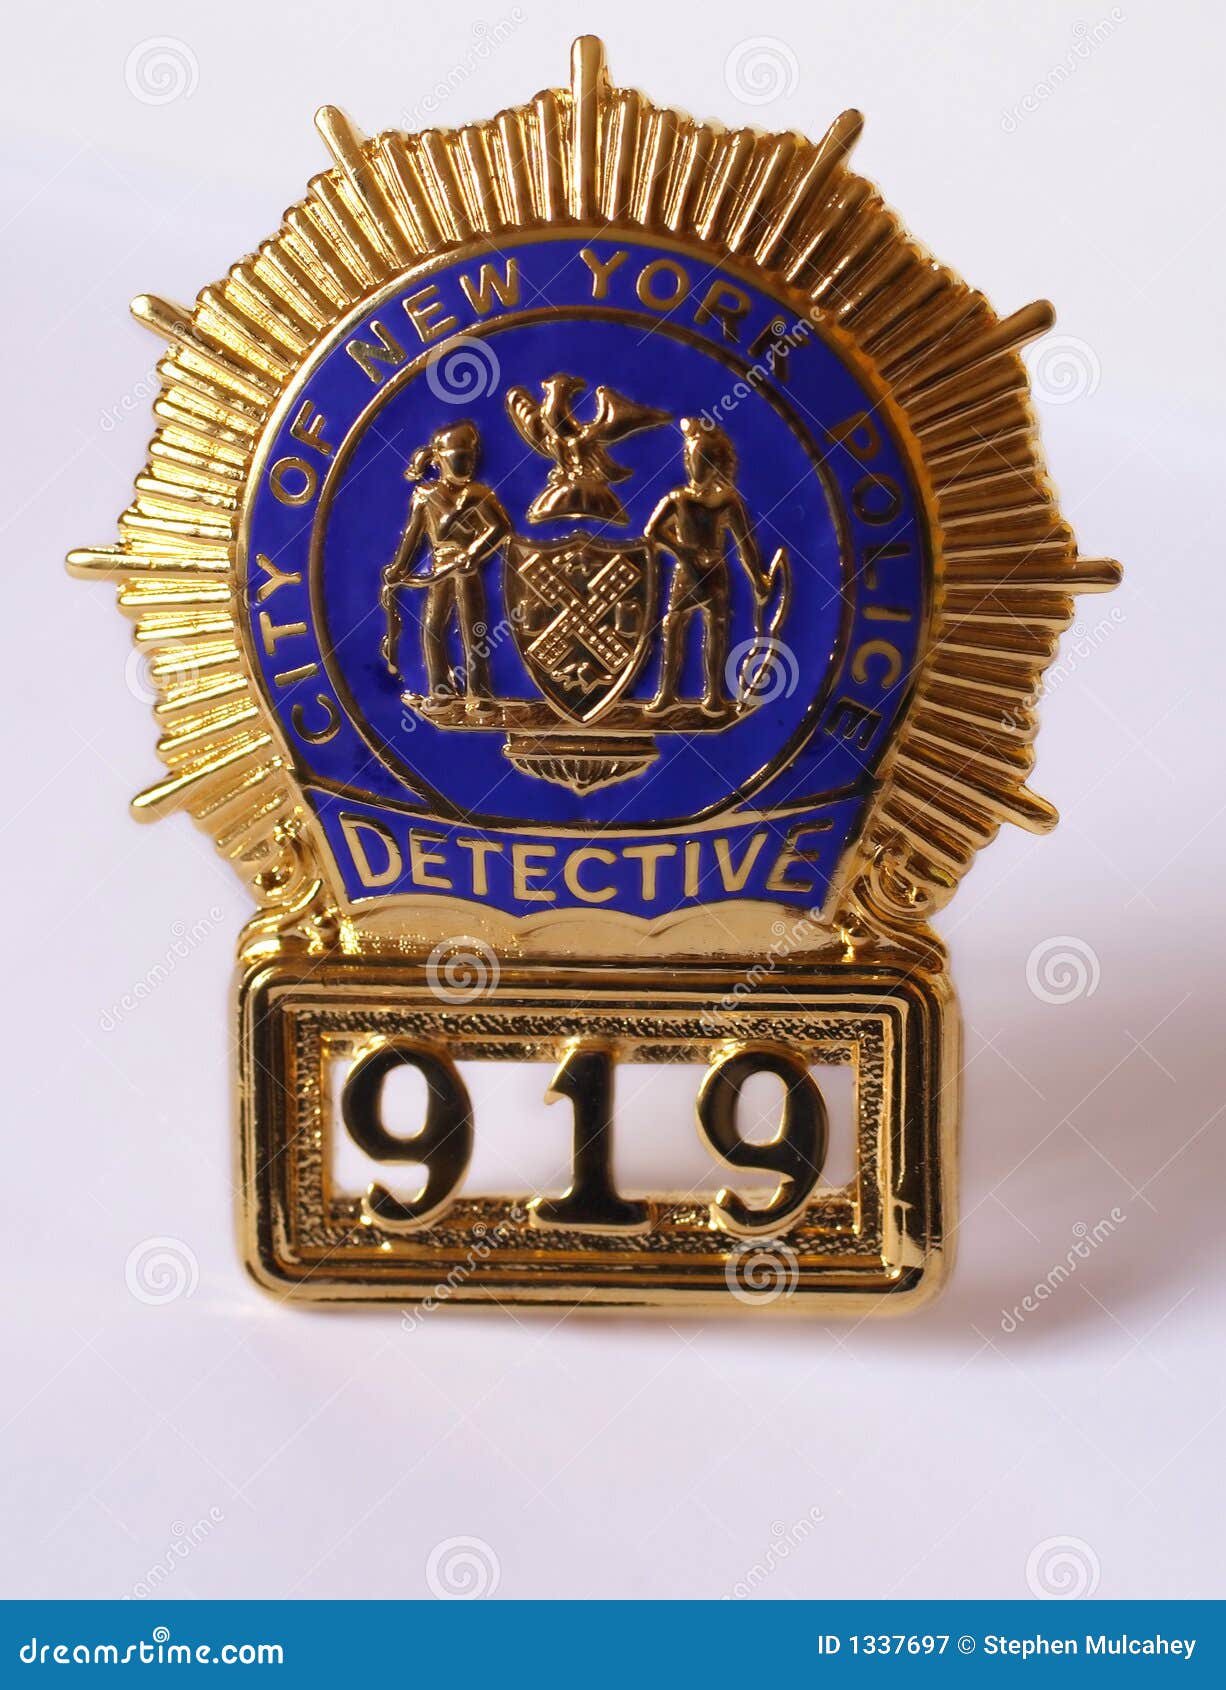 Shield nypd detective NYPD badges